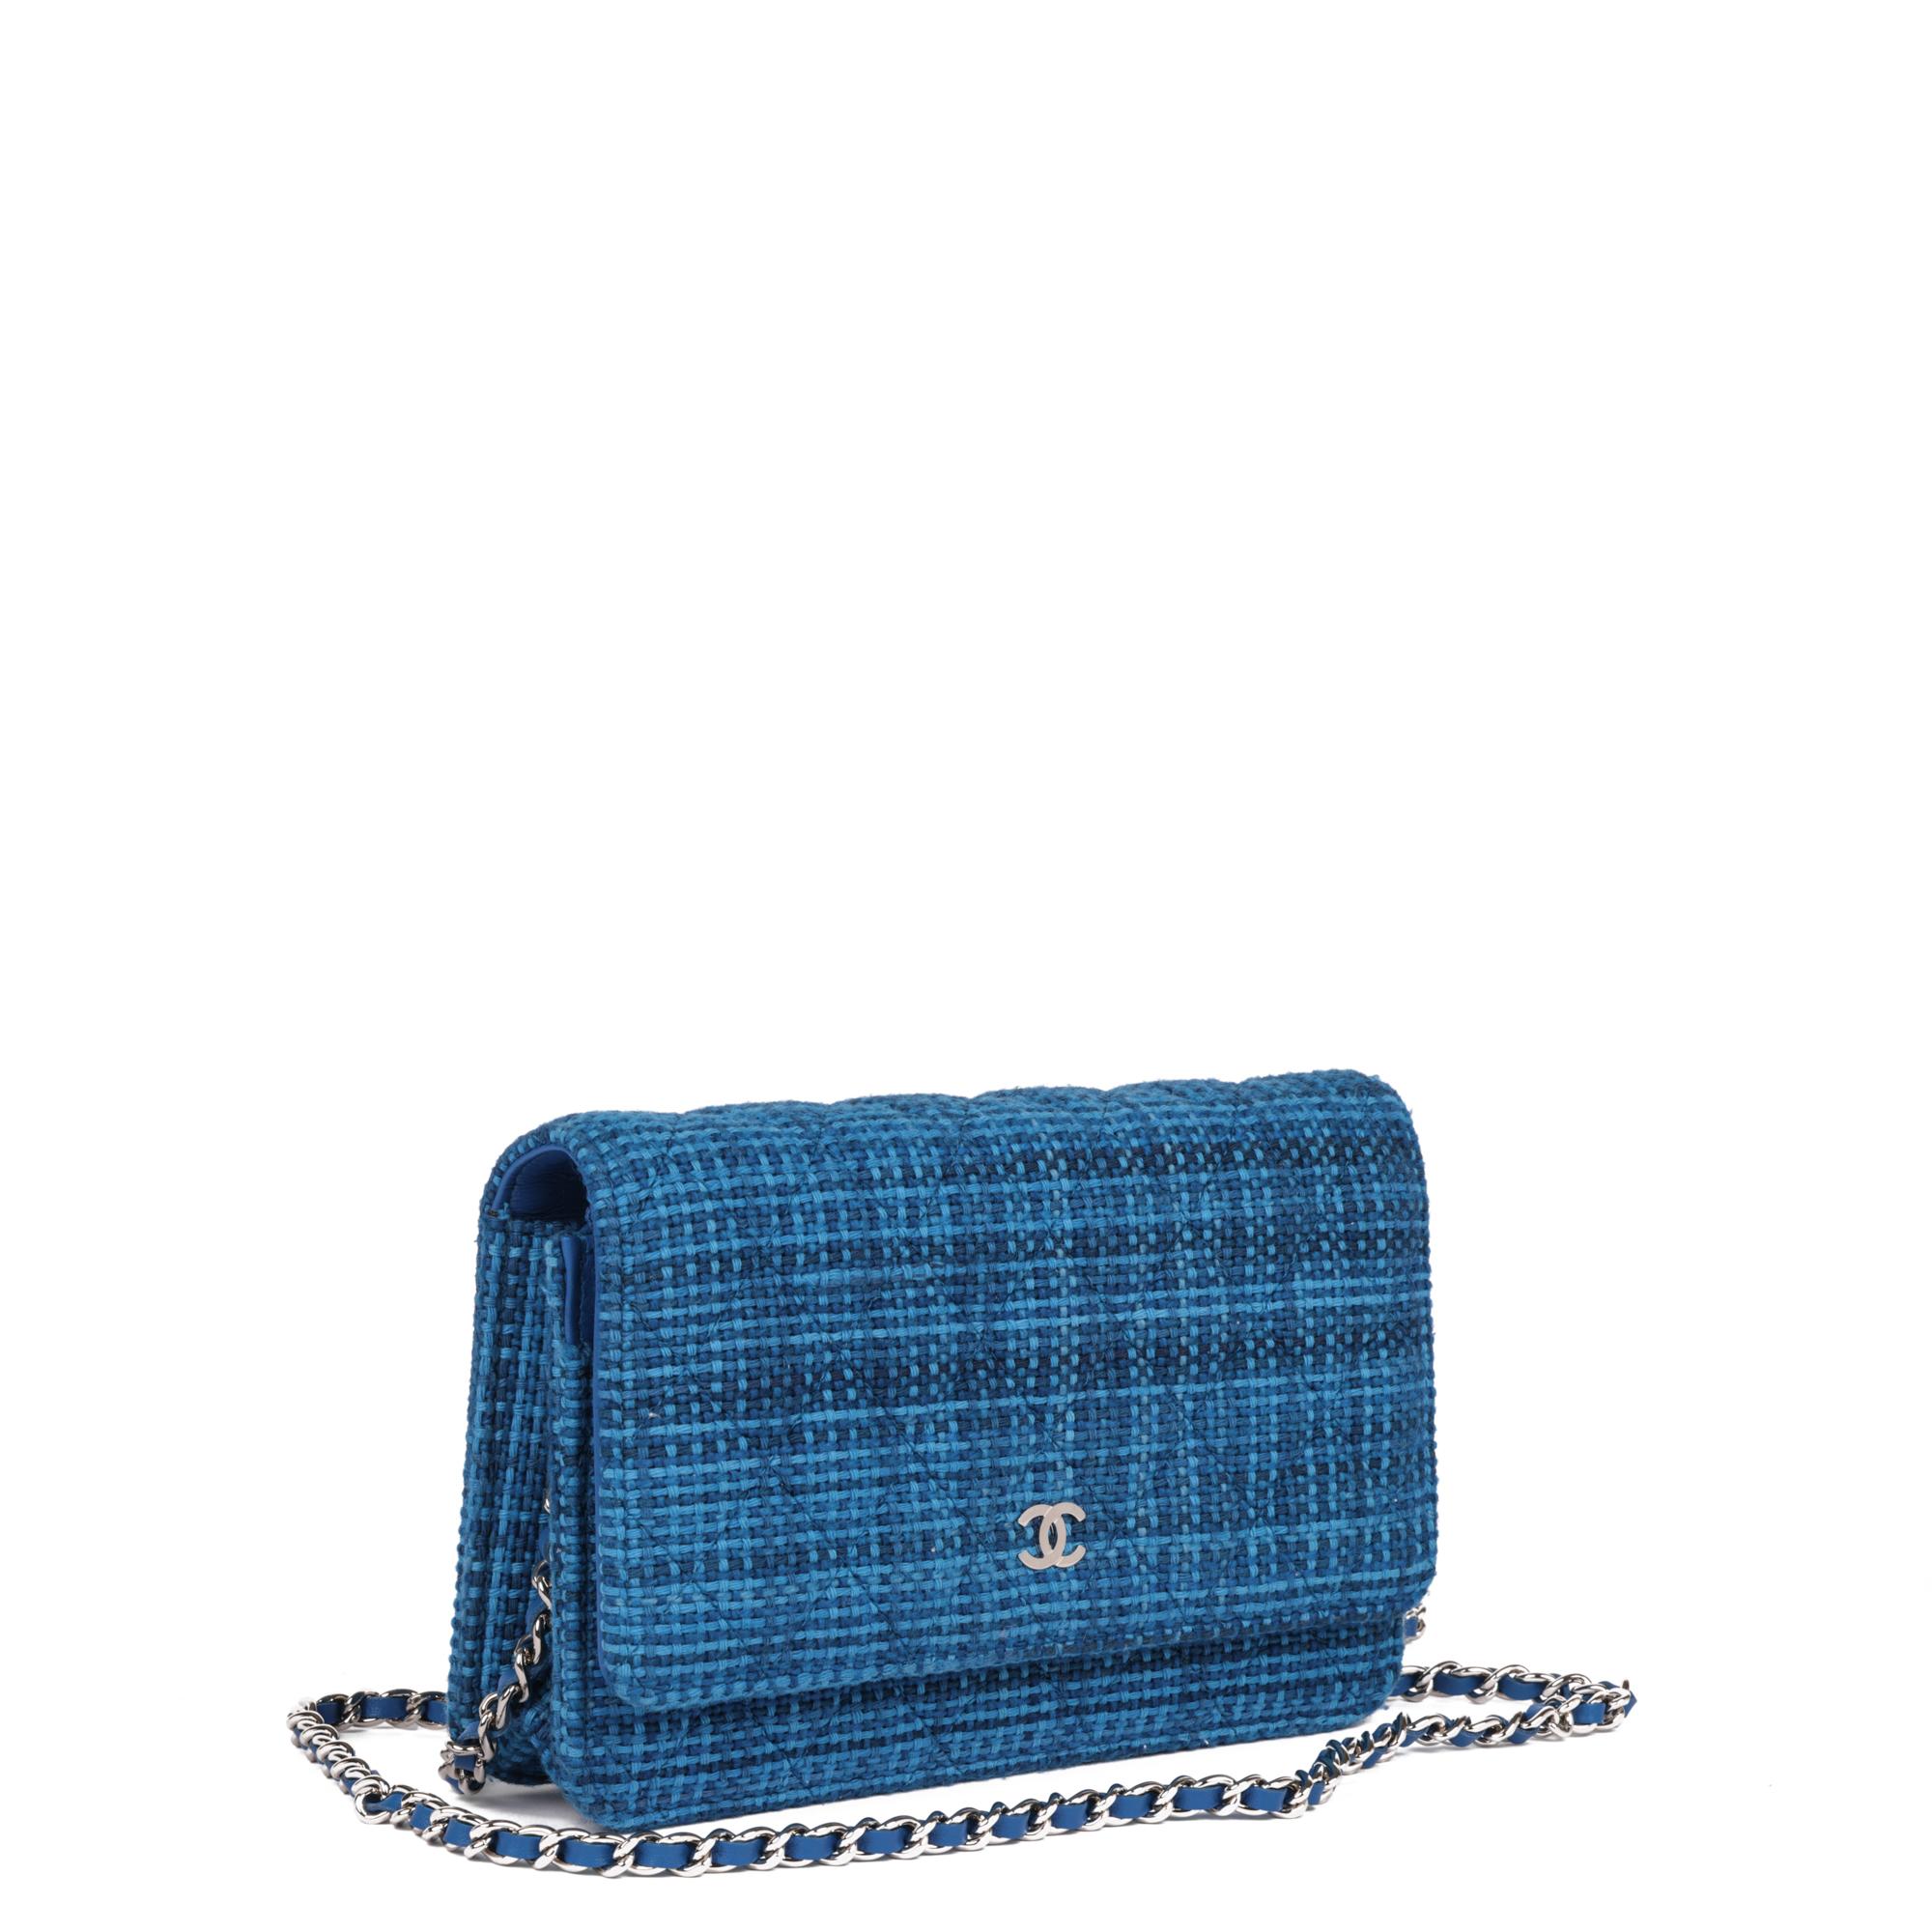 CHANEL
Blue Quilted Tweed Fabric Wallet-on-Chain WOC

Xupes Reference: CB851
Serial Number: 29578684
Age (Circa): 2019
Accompanied By: Authenticity Card
Authenticity Details: Authenticity Card, Serial Sticker (Made in Italy)
Gender: Ladies
Type: